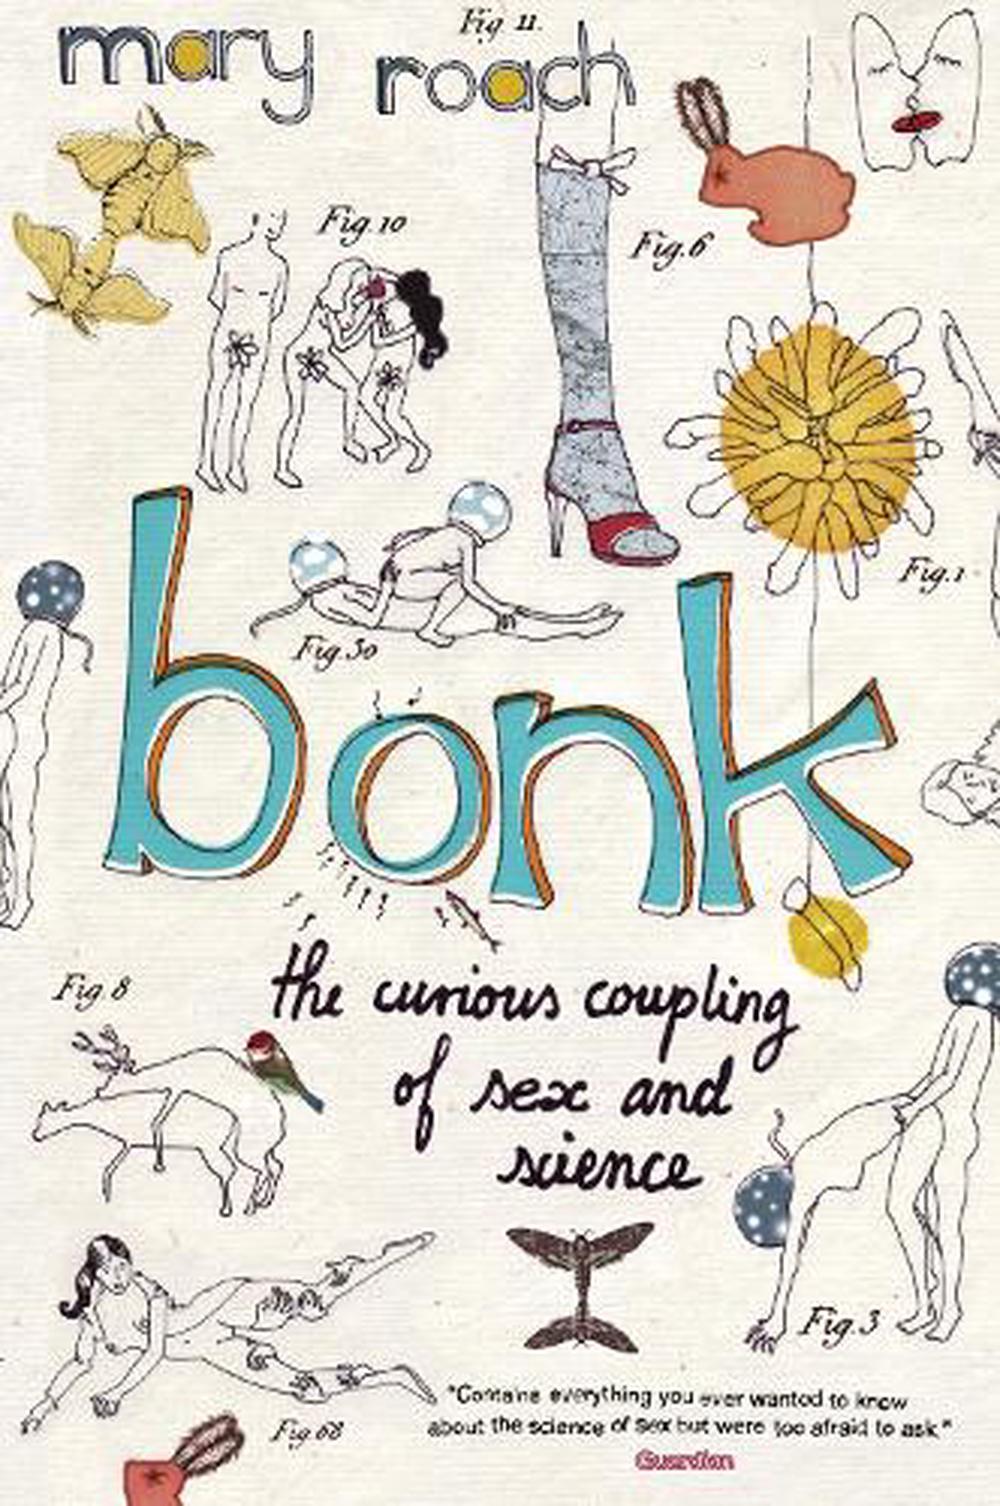 bonk the curious coupling of science and se